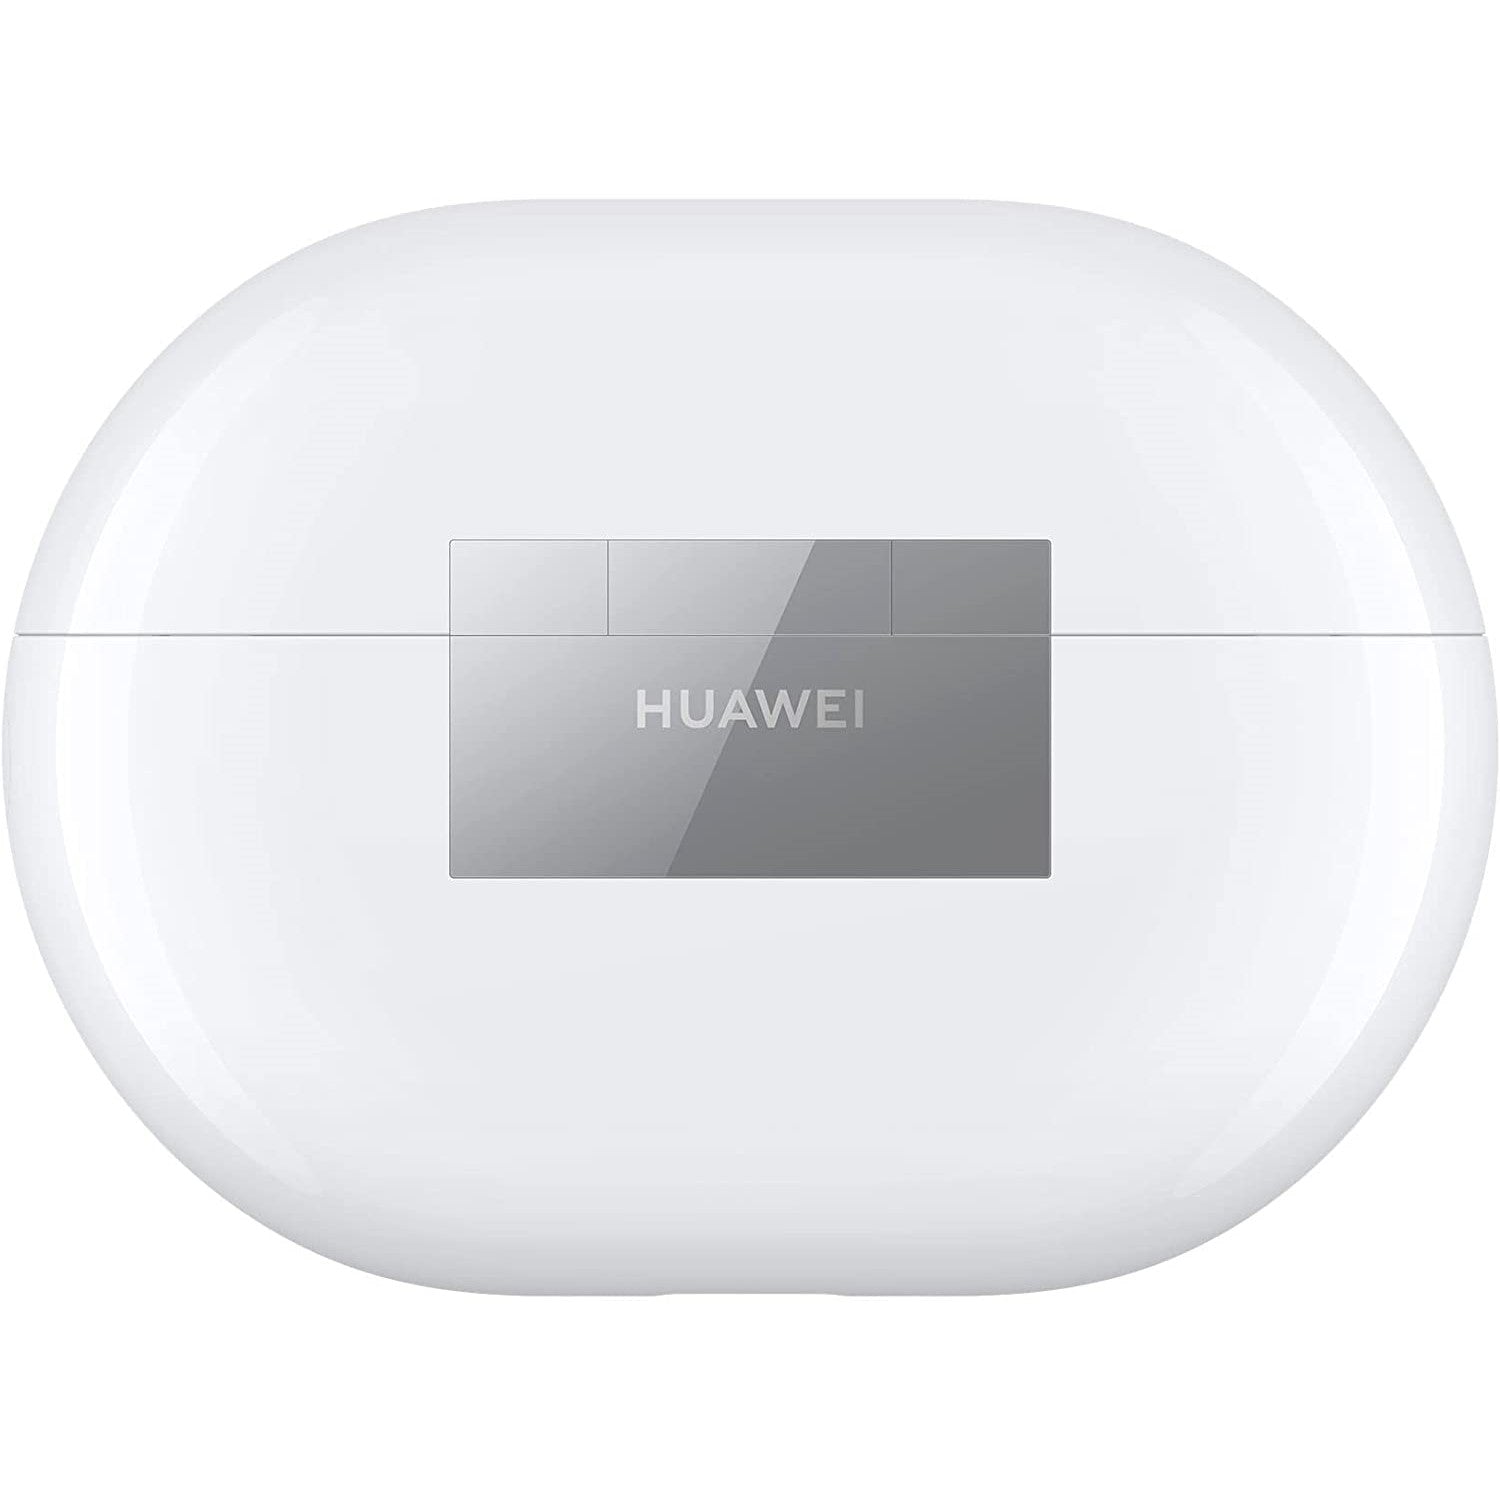 HUAWEI FreeBuds Pro, Active Noise Cancelling Wireless Earbuds - White Huawei